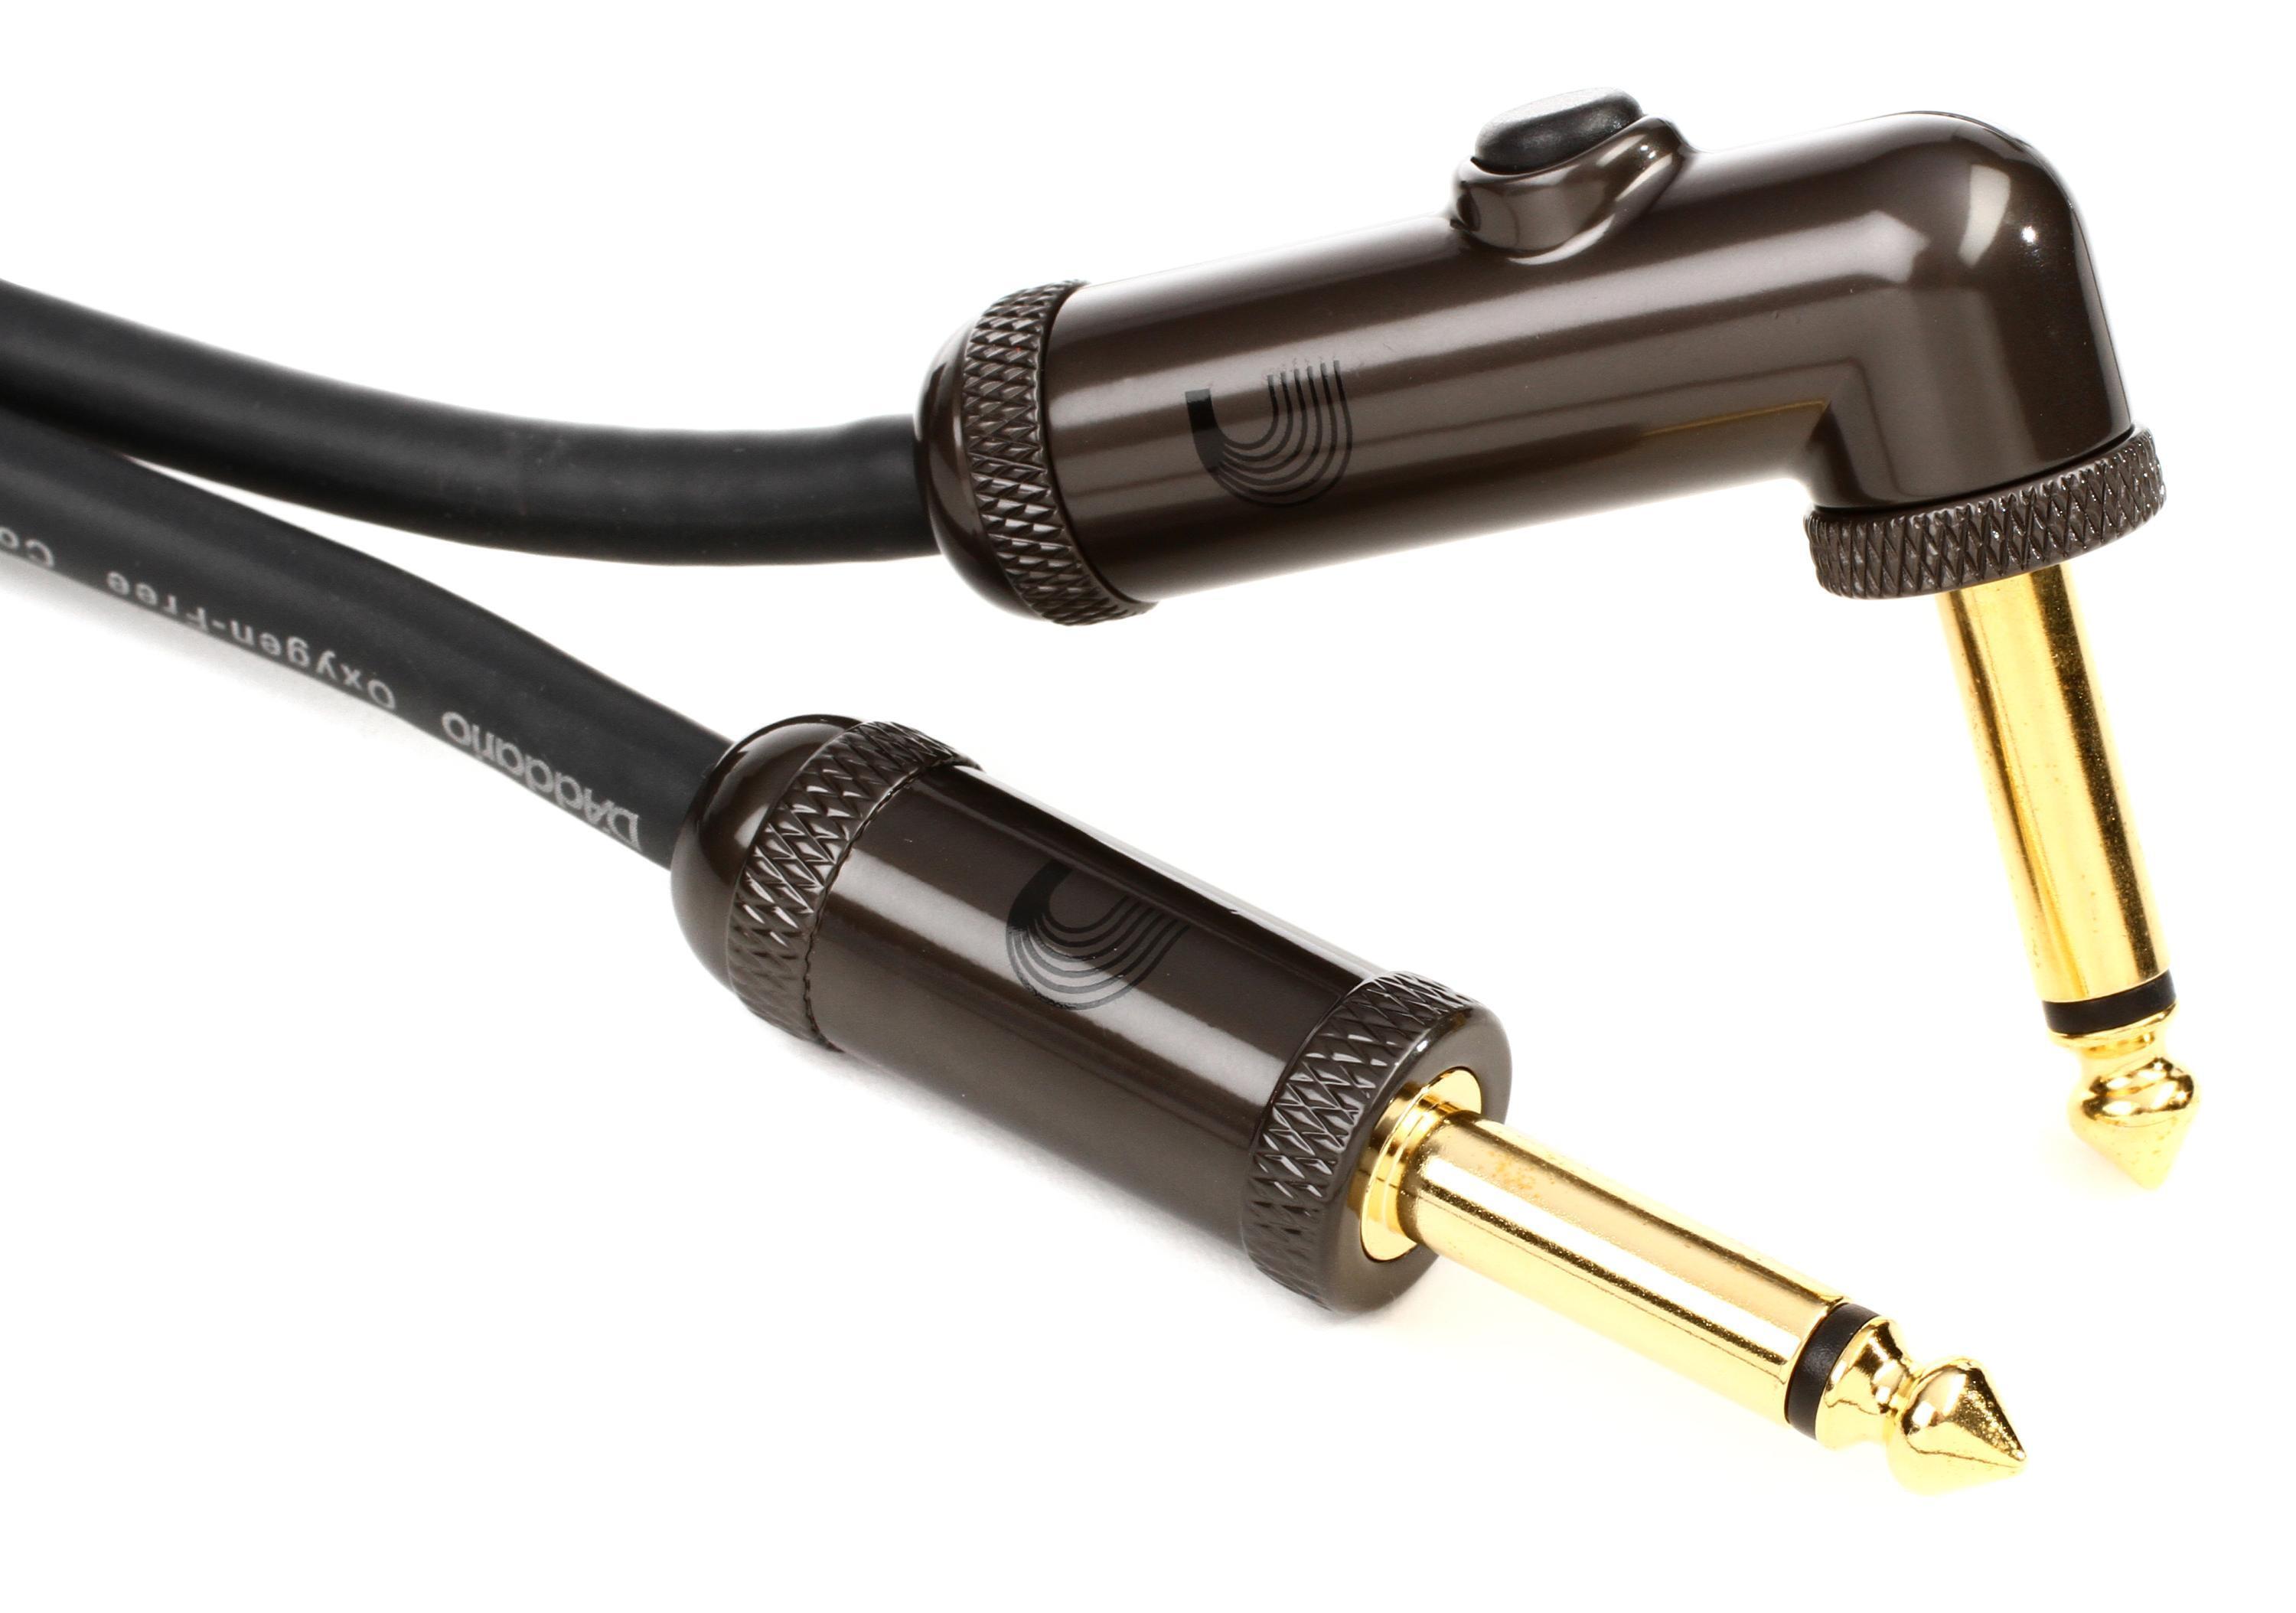 Planet Waves Circuit Breaker Instrument Cable 20FT(約6m）- S L 仕入先在庫品 プレゼント -  レコーディング、PA機材